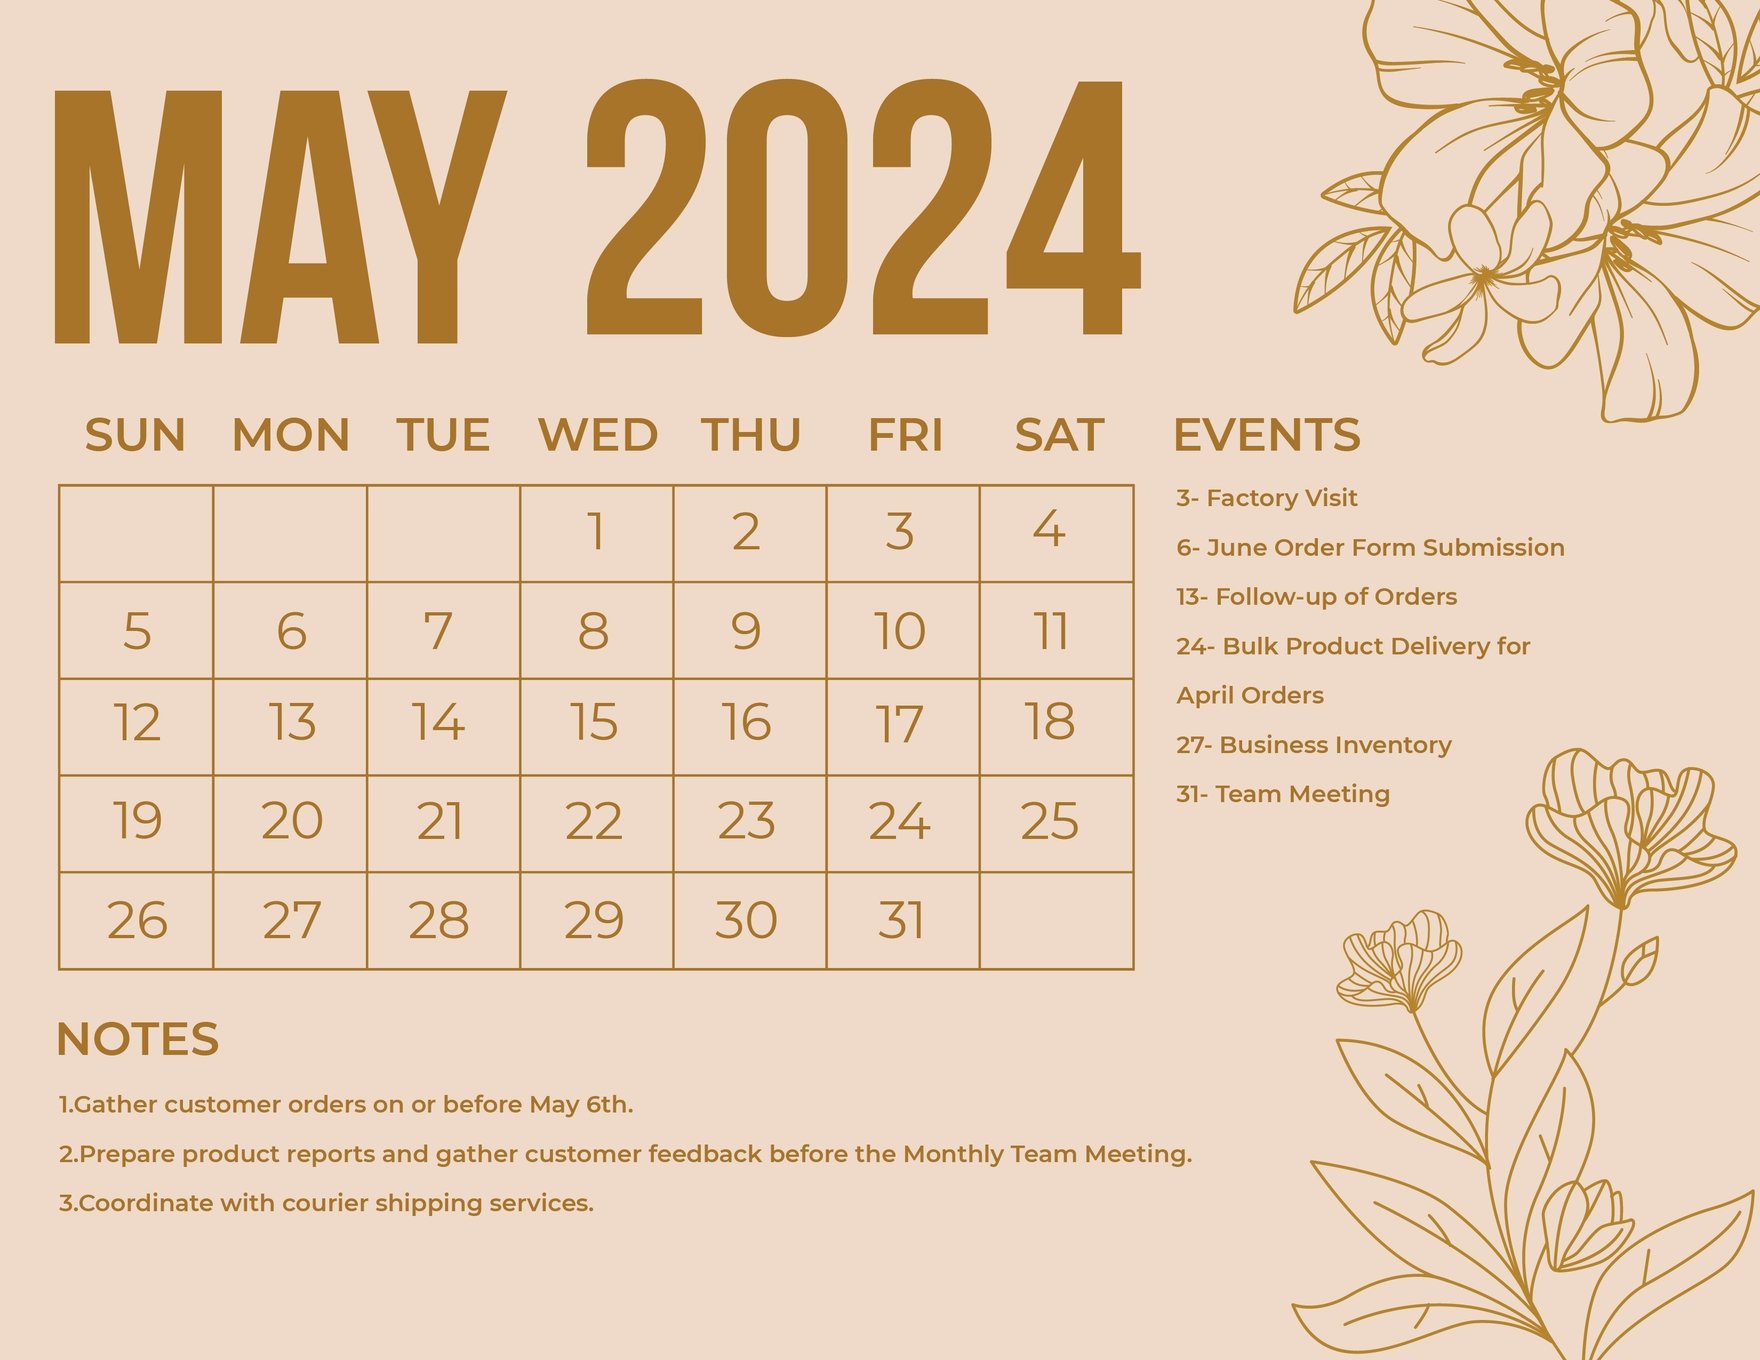 May 2024 Calendar in Word FREE Template Download